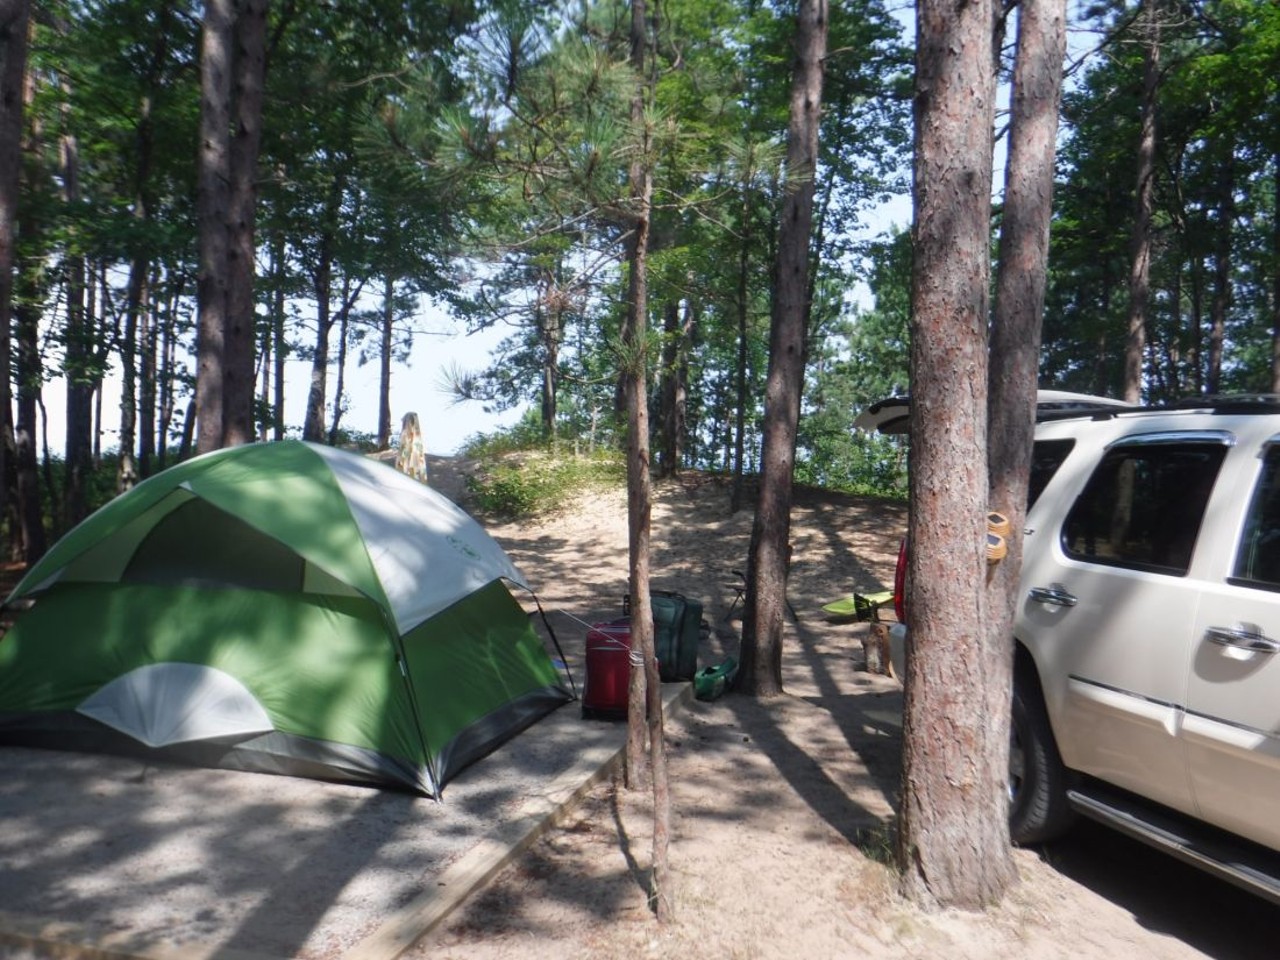 Twelvemile Beach Campground
Grand Marias; 906-387-3700; nps.gov
Located on the Pictured Rocks National Lakeshore, Twelvemile Beach Campground is a bit of a drive but any opportunity to pitch a tent between the tall trees of northern Michigan just steps from the Lake Superior shoreline is absolutely worth the trip.
Photo via nps.gov